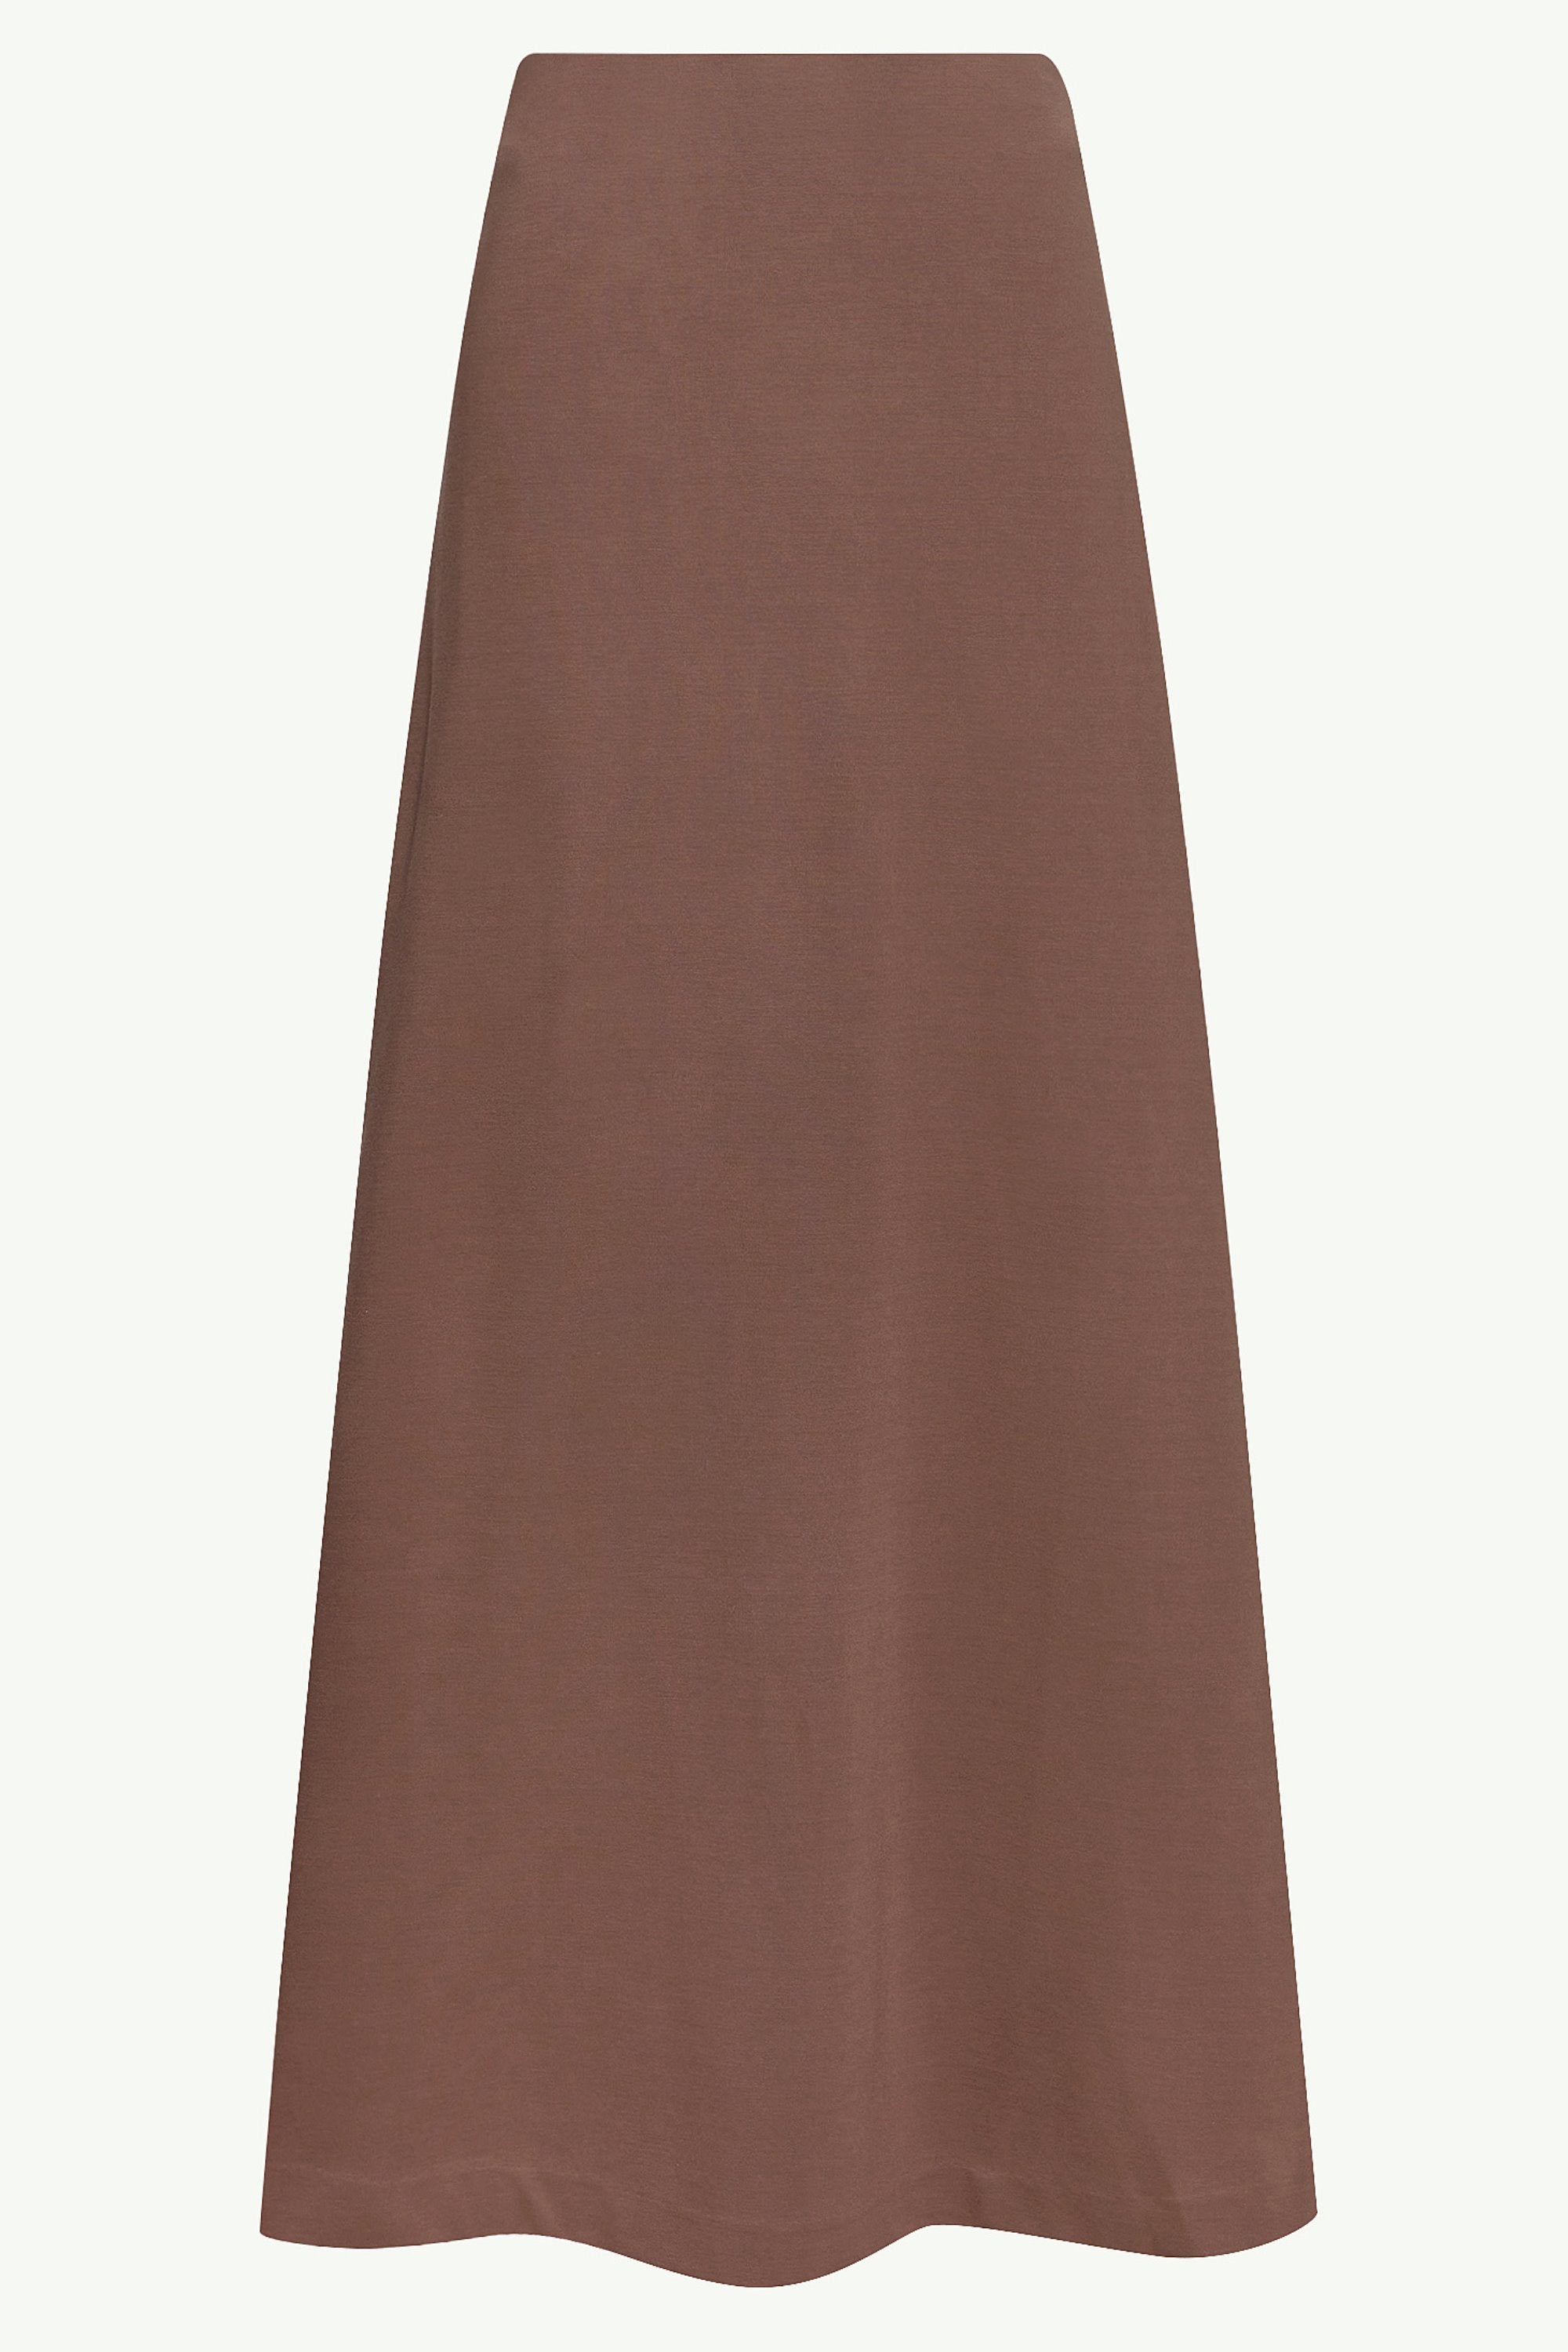 Essential Jersey A-Line Maxi Skirt - Dark Taupe Clothing epschoolboard 